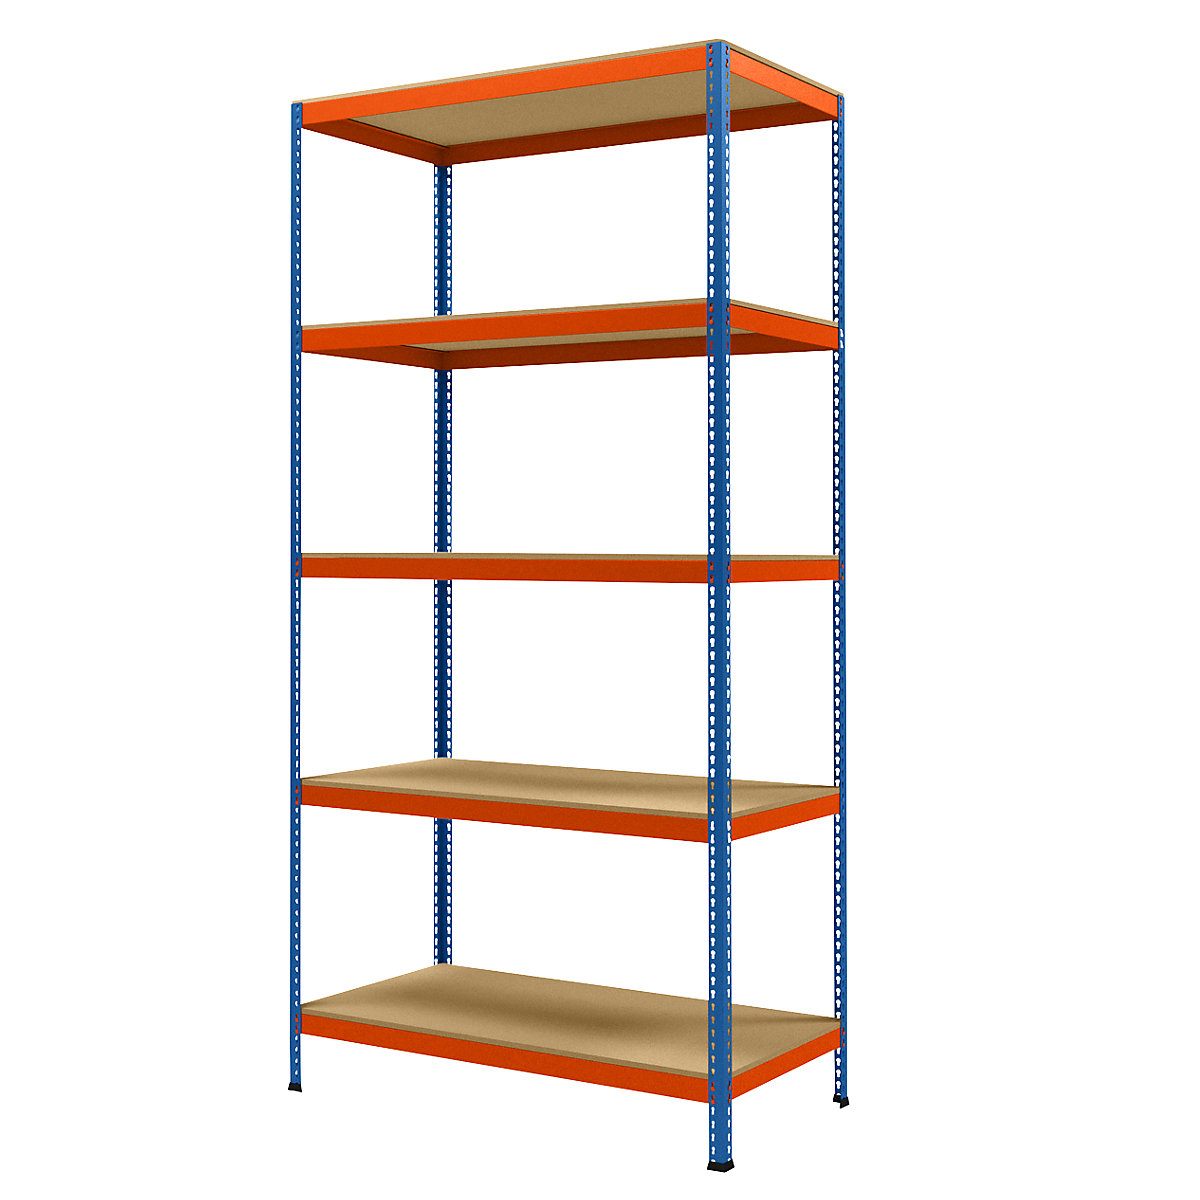 Wide span heavy duty shelving, height 3048 mm, overall depth 773 mm, width 1536 mm